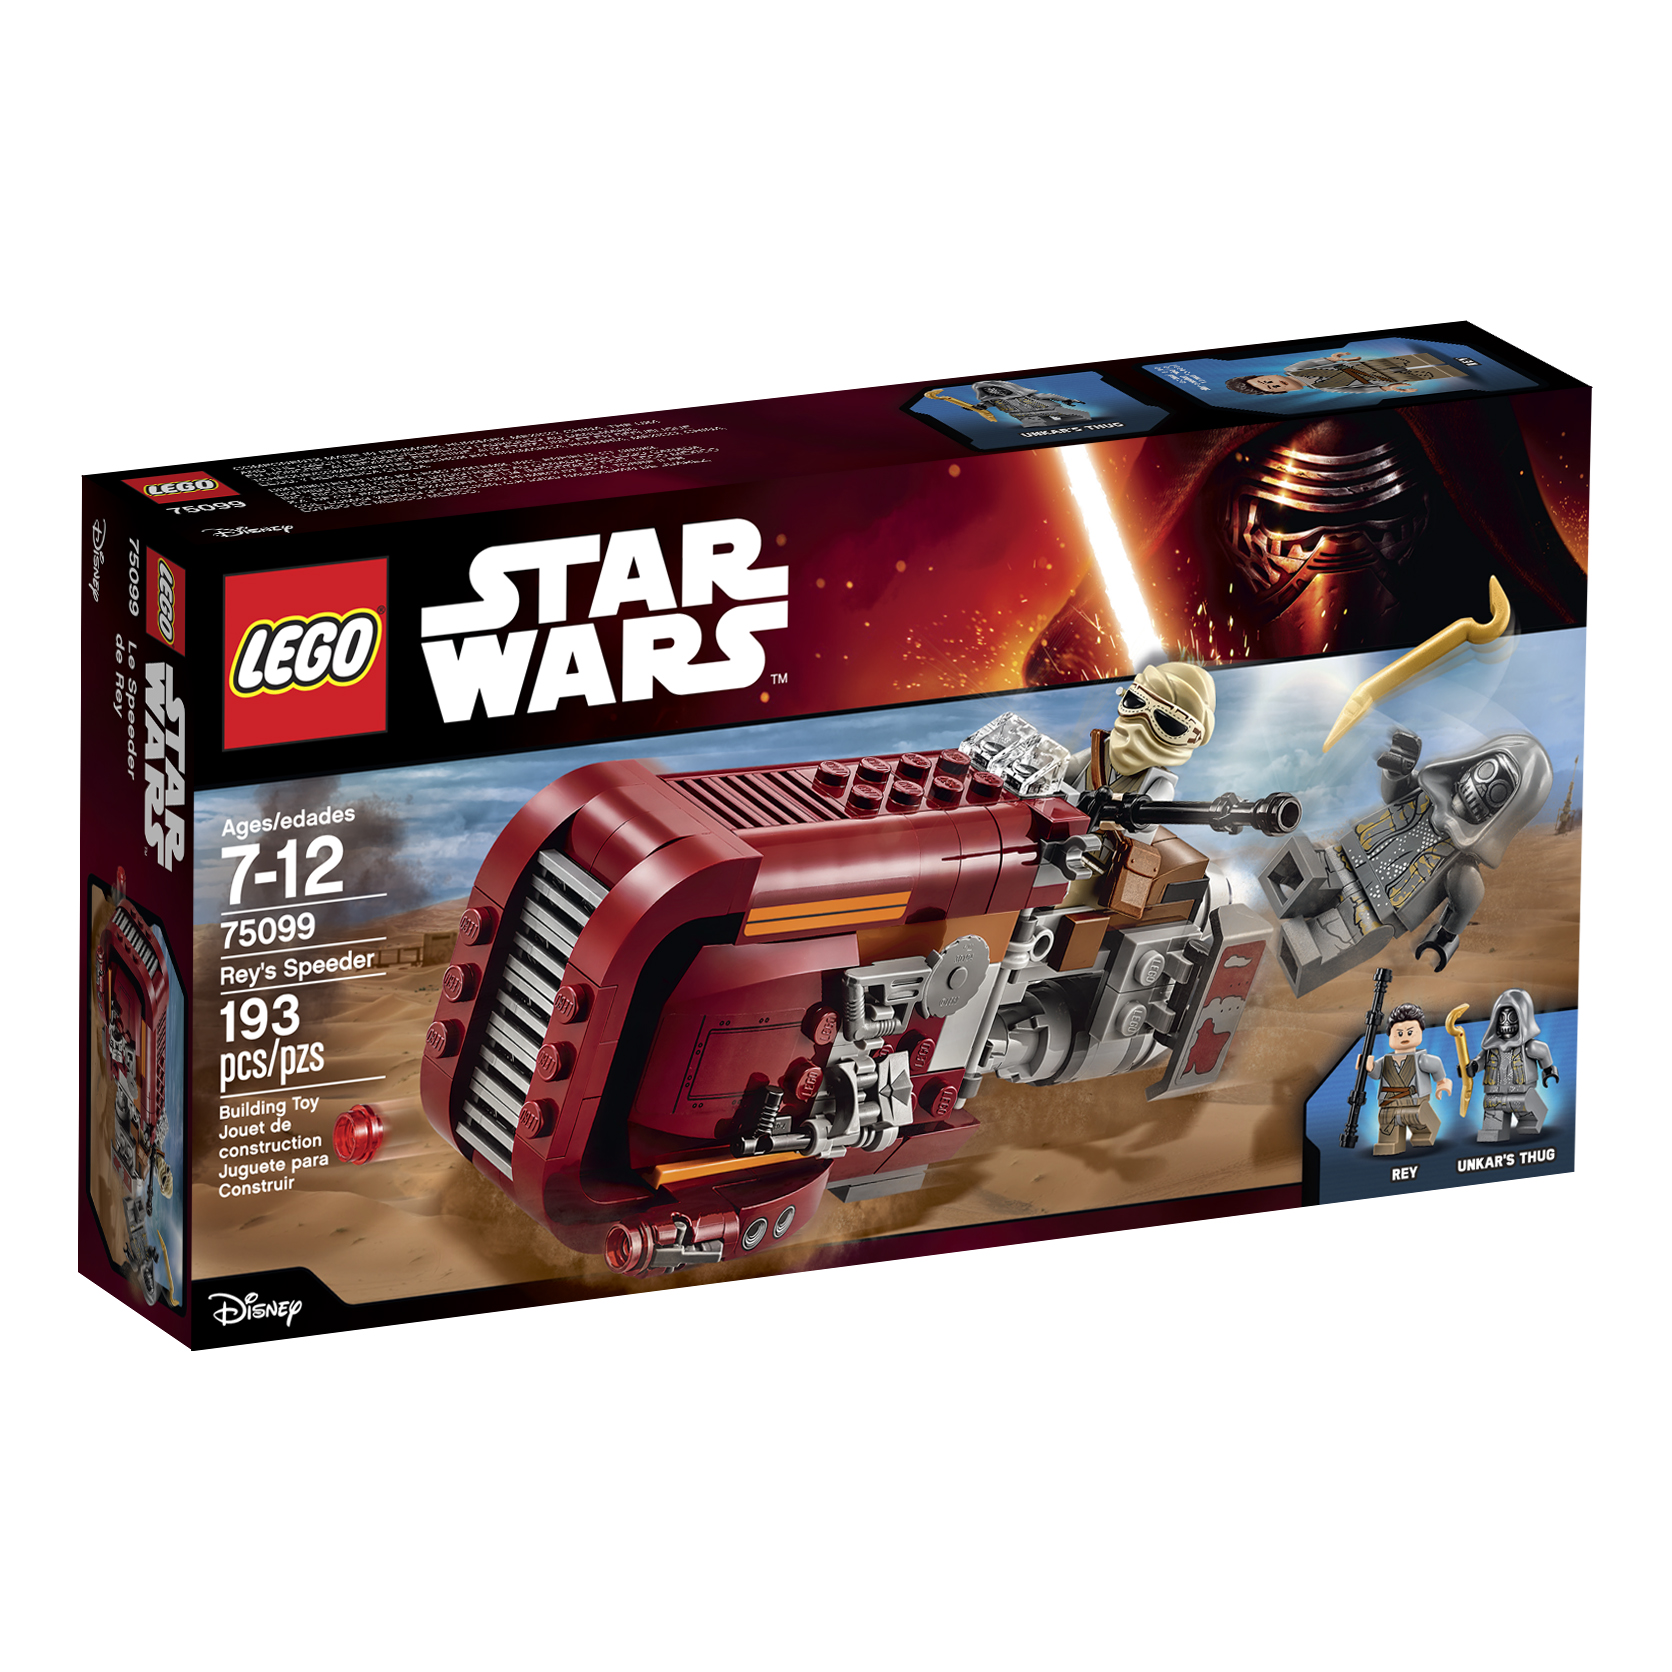 LEGO Officially Unveils Most Of The Force Awakens Sets - FBTB